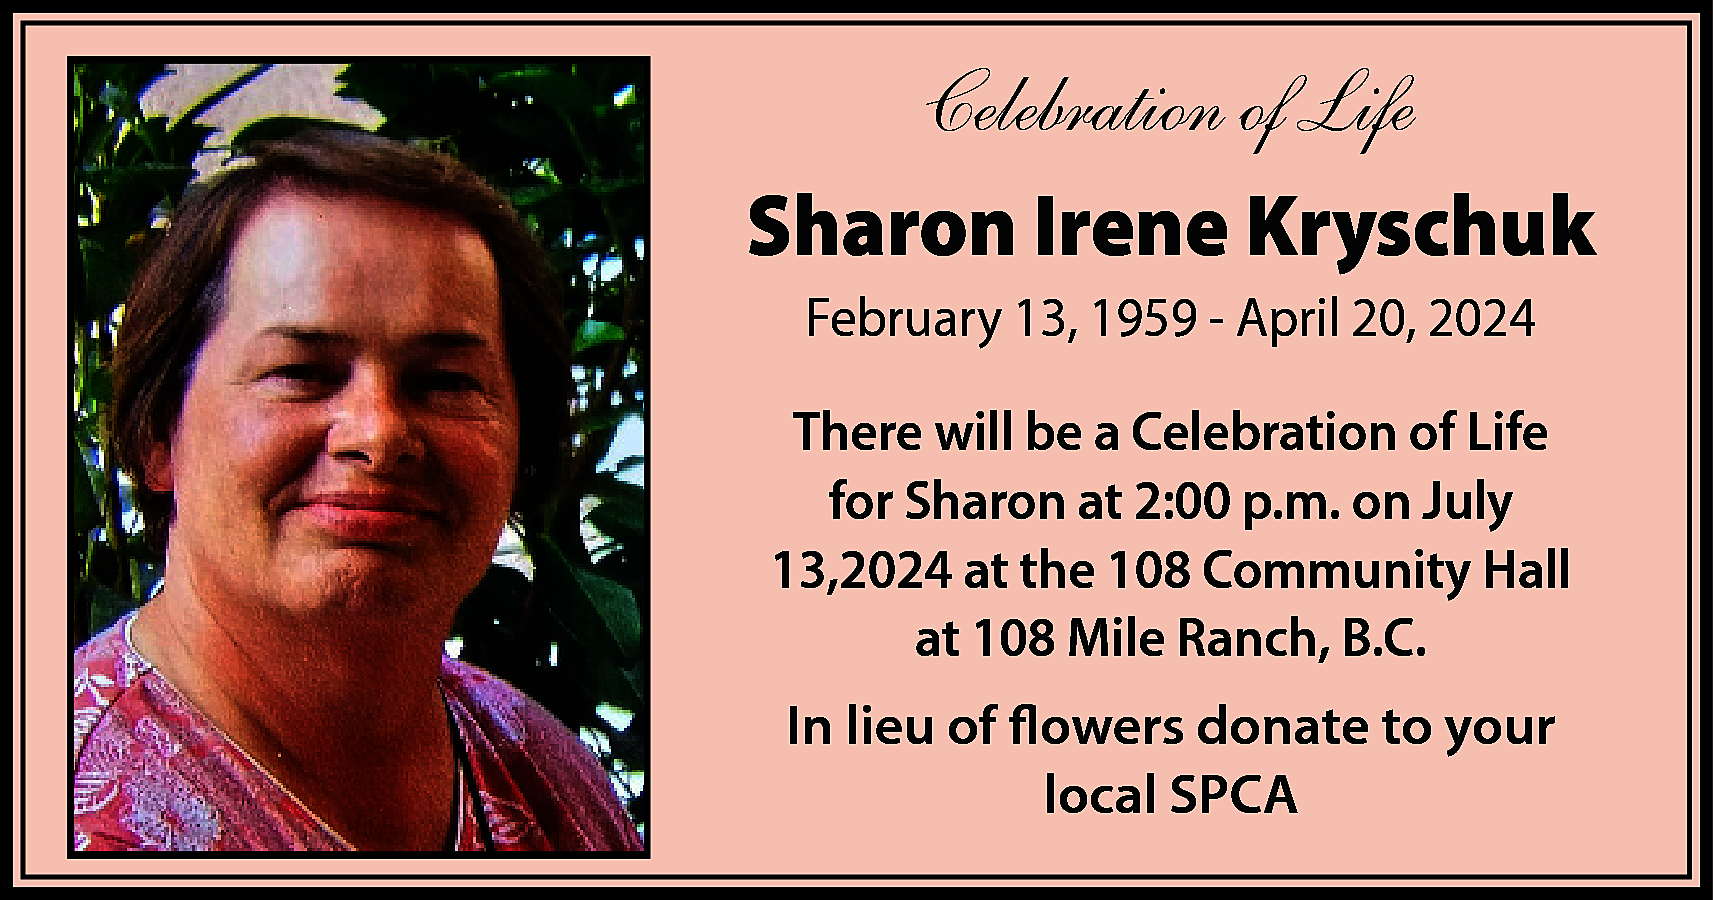 Celebration of Life <br>Sharon Irene  Celebration of Life  Sharon Irene Kryschuk  February 13, 1959 - April 20, 2024  There will be a Celebration of Life  for Sharon at 2:00 p.m. on July  13,2024 at the 108 Community Hall  at 108 Mile Ranch, B.C.  In lieu of flowers donate to your  local SPCA    